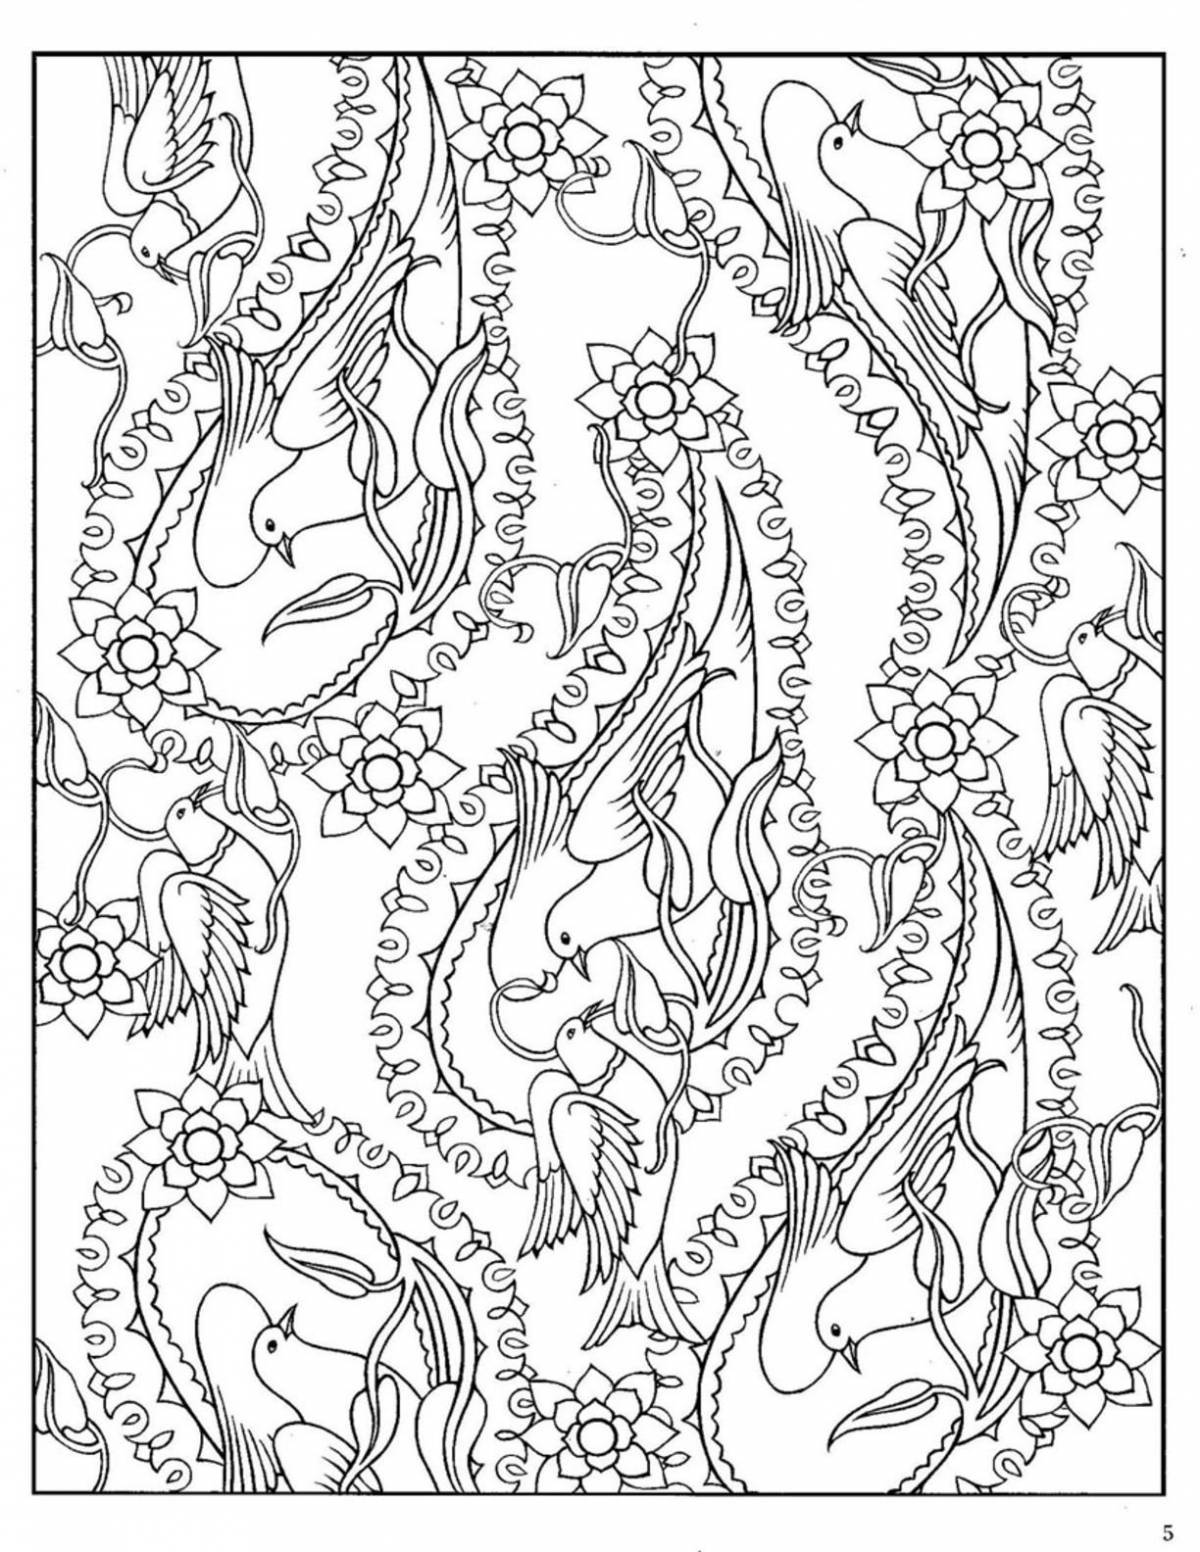 Anxiety Reducing Coloring Page